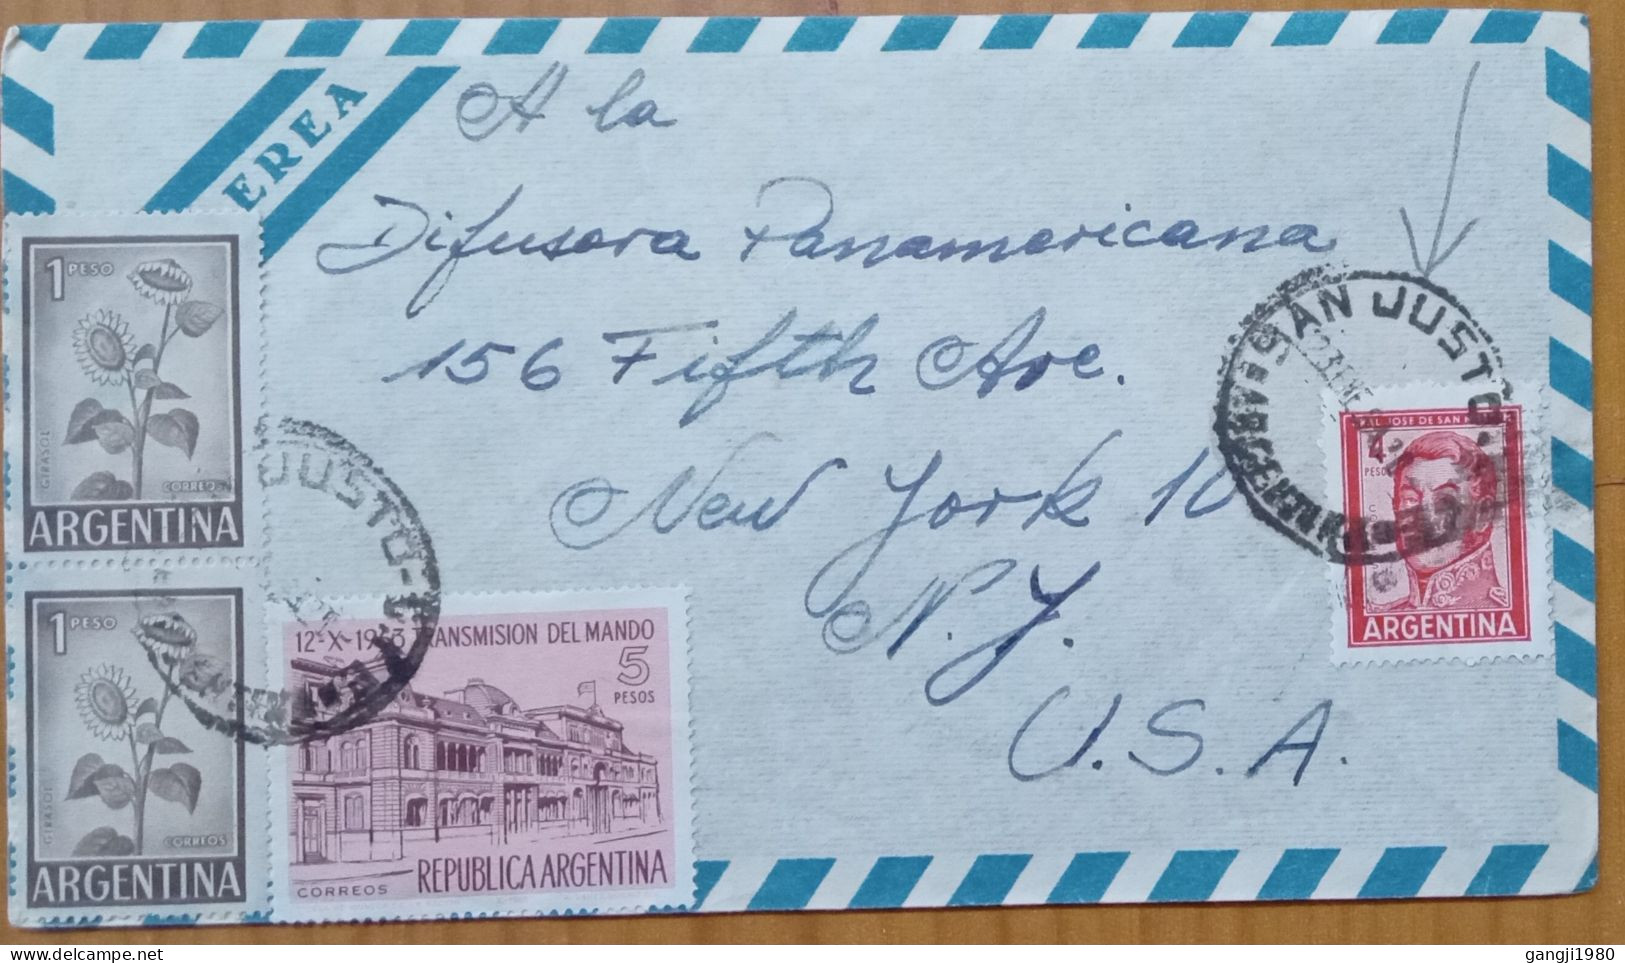 ARGENTINA 1964, COVER USED TO USA, 4 STAMP, SAN MARTIN,1963 GOVT. HOUSE BUILDING, SUNFLOWER PLANT, SAN JUSTO CITY CANCEL - Covers & Documents